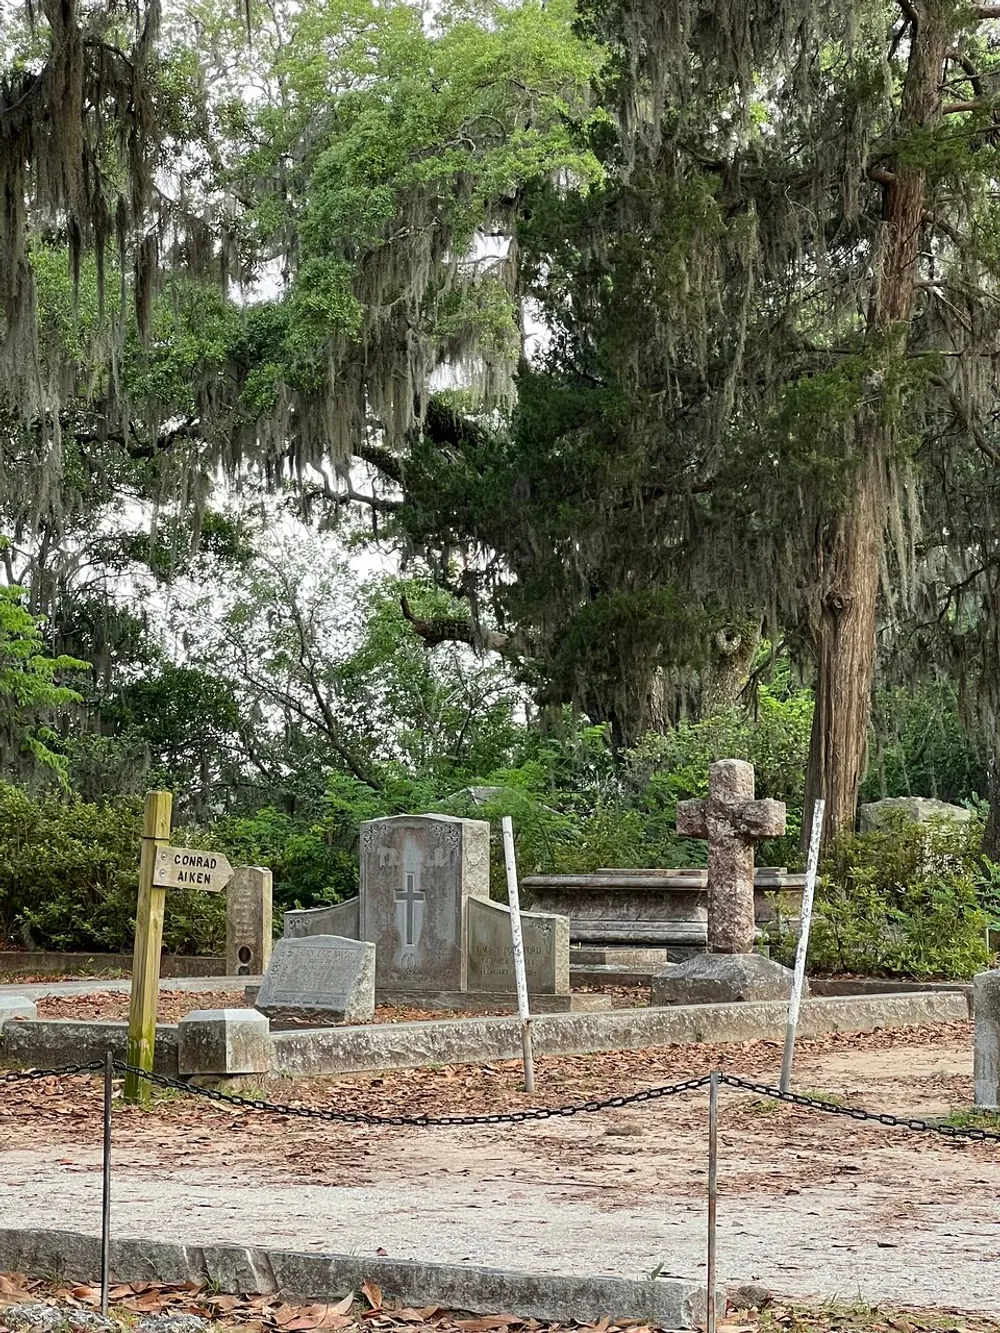 The image shows a serene cemetery setting with moss-draped trees and weathered grave markers including crosses and a bench-style tombstone